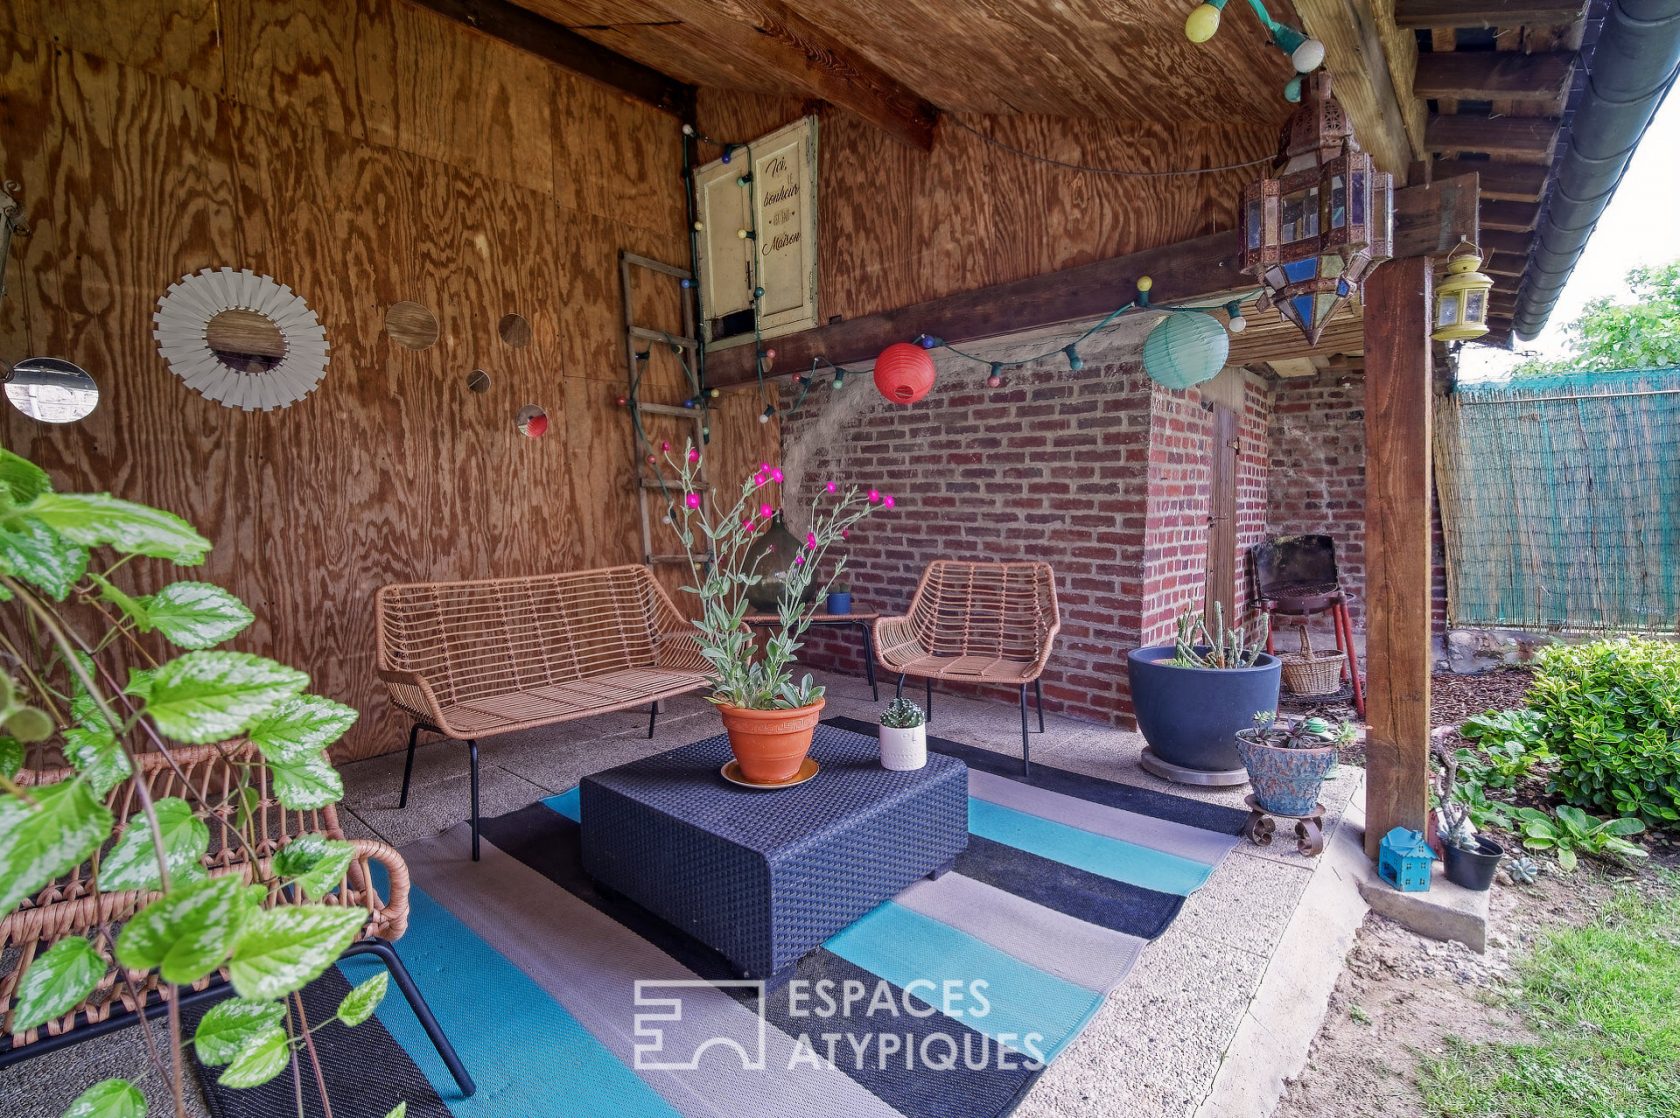 The welcoming – renovated bourgeois house near Soissons